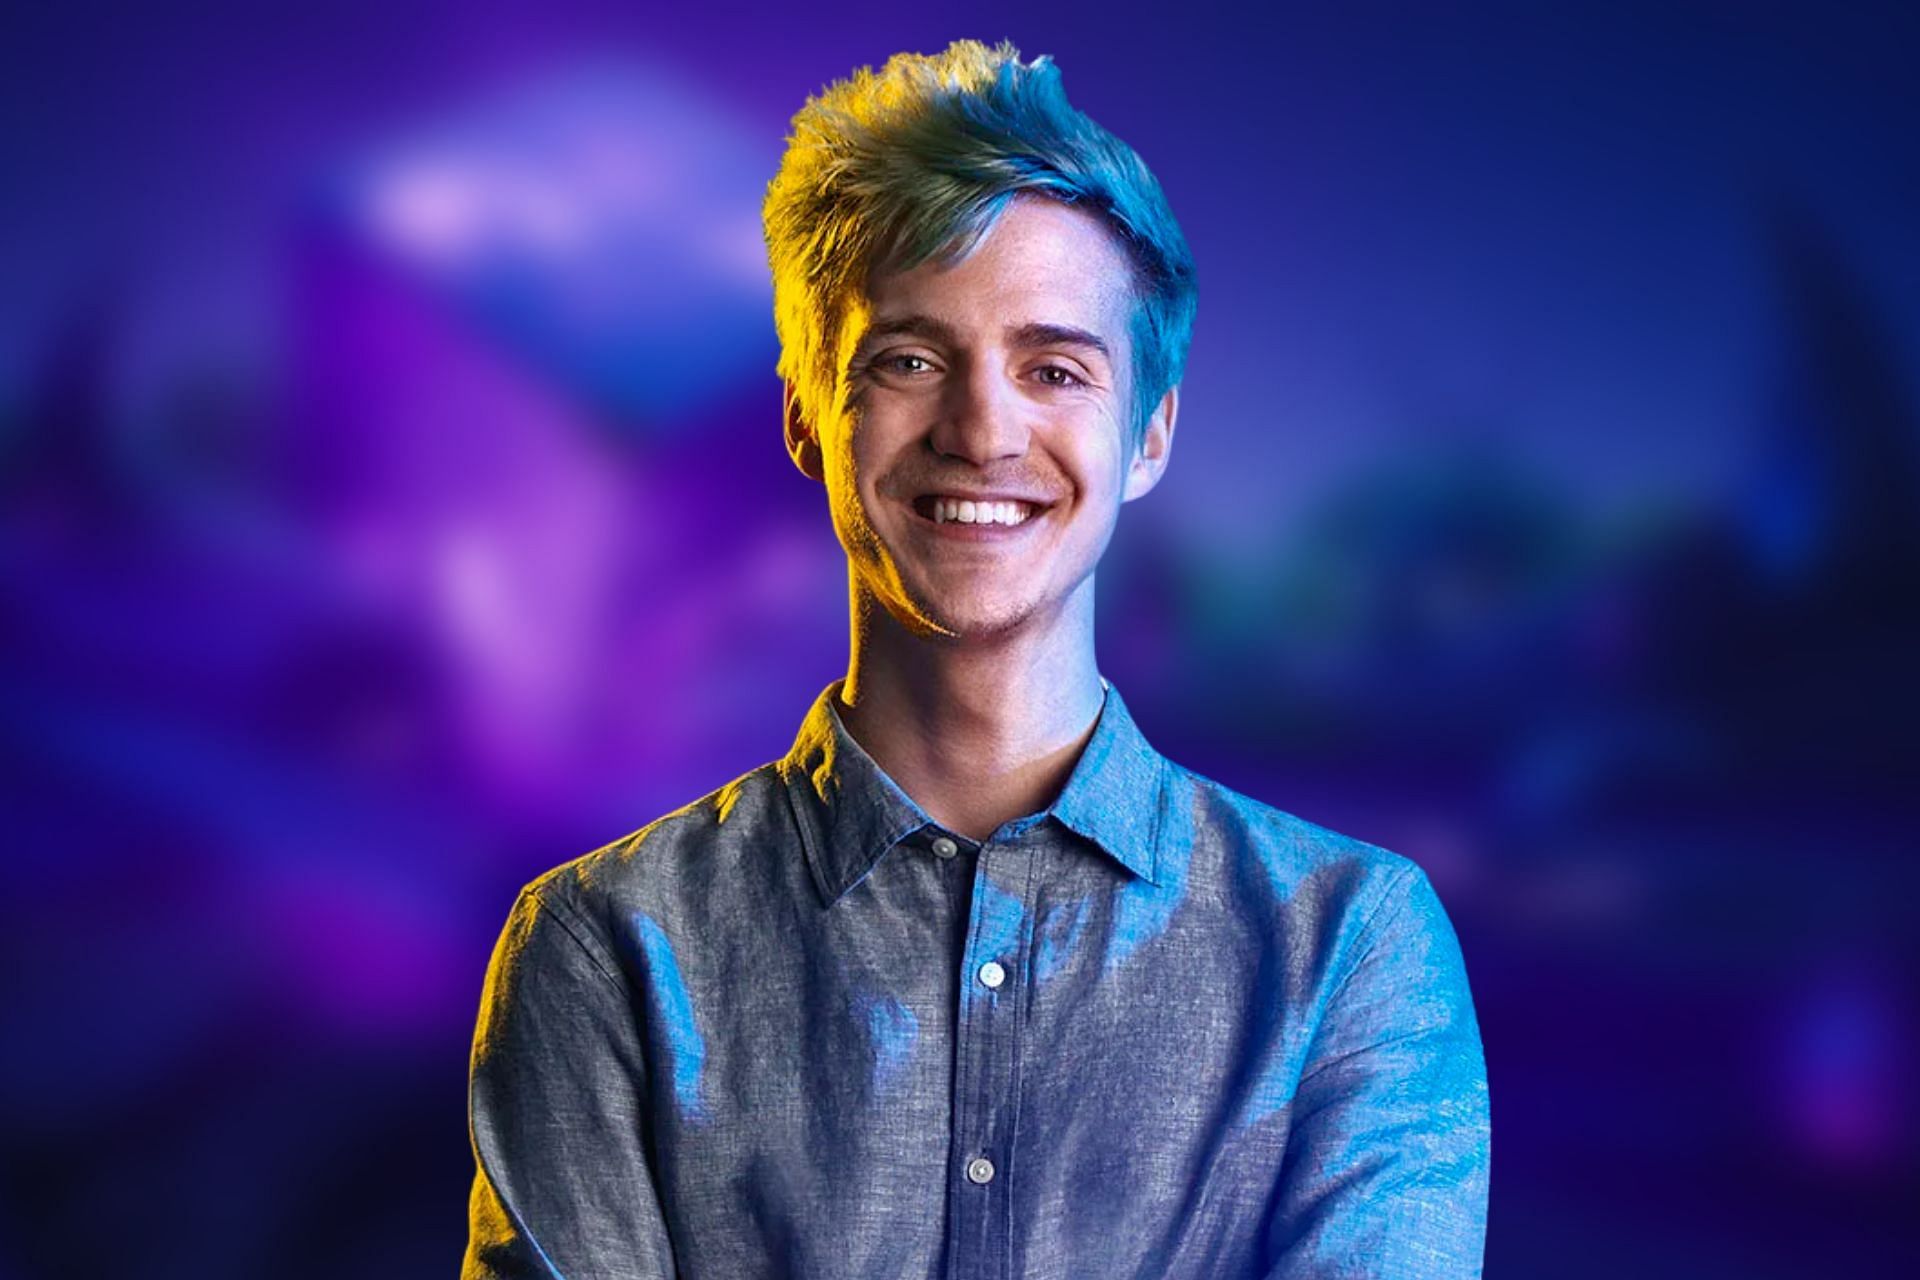 Ninja was away from streaming for a few days, but is right back to grinding away on Twitch (Image via Sportskeeda)